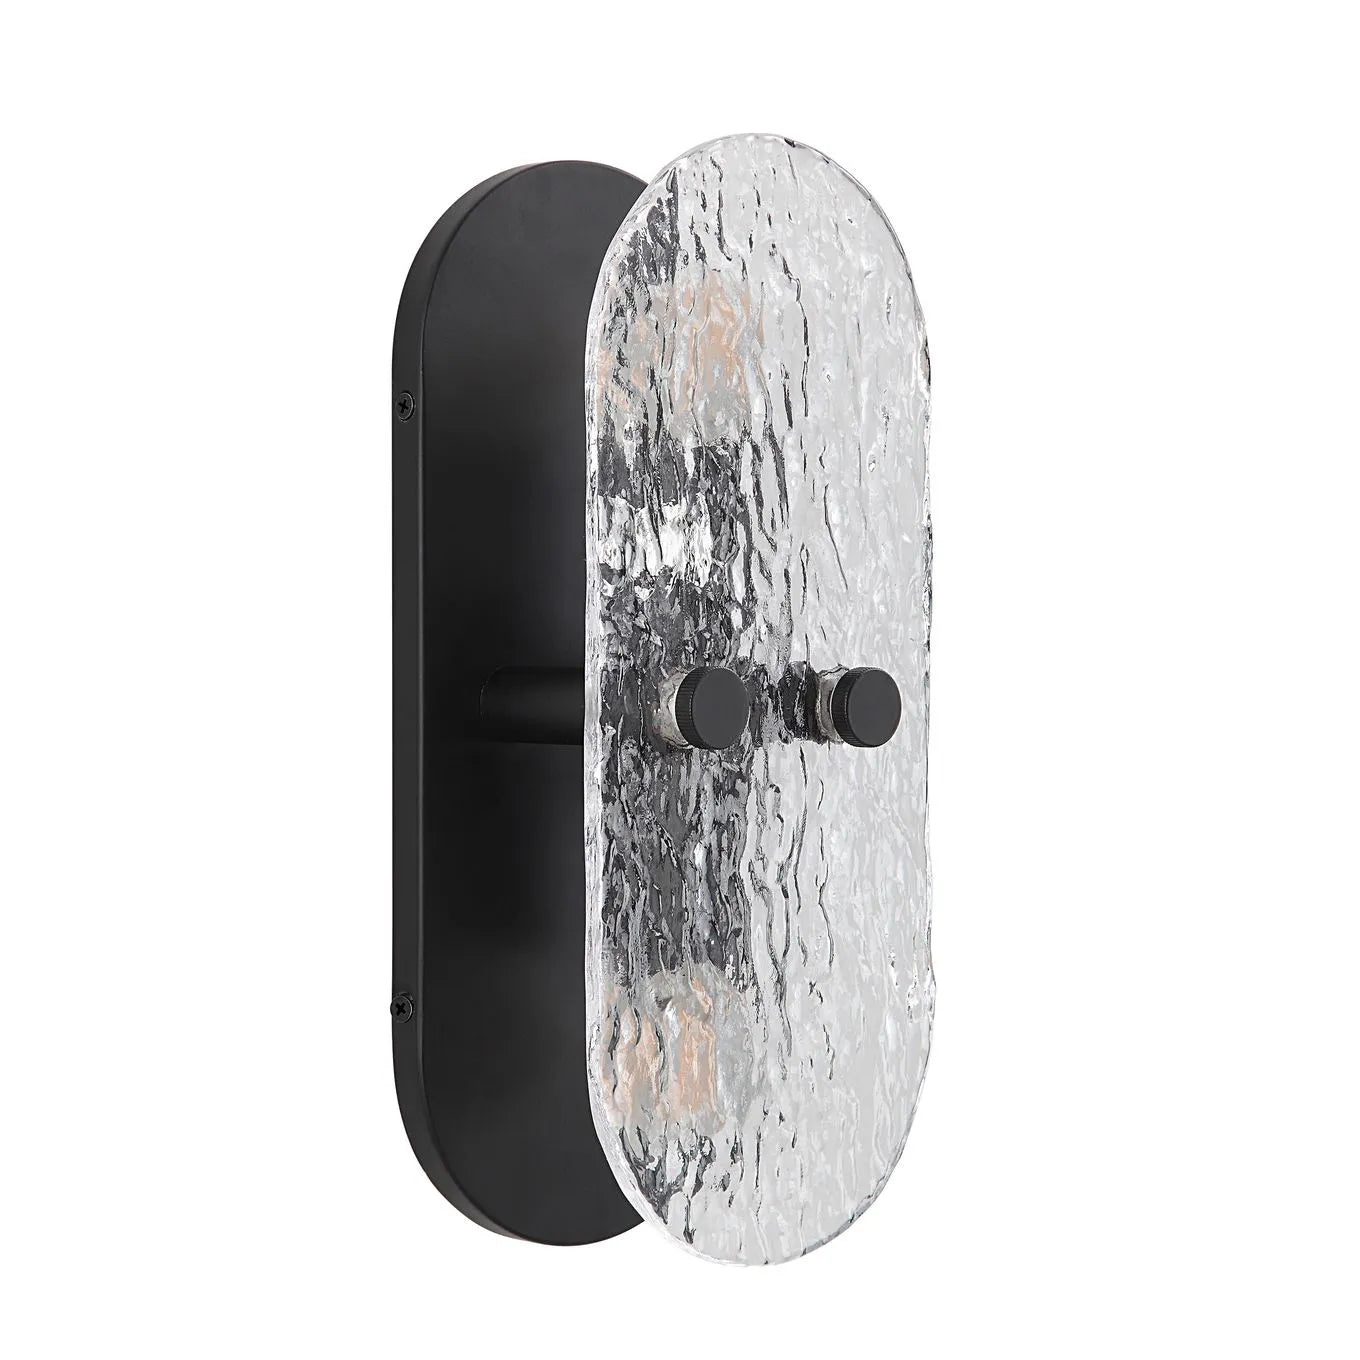 Noci 2-Light Wall Sconce